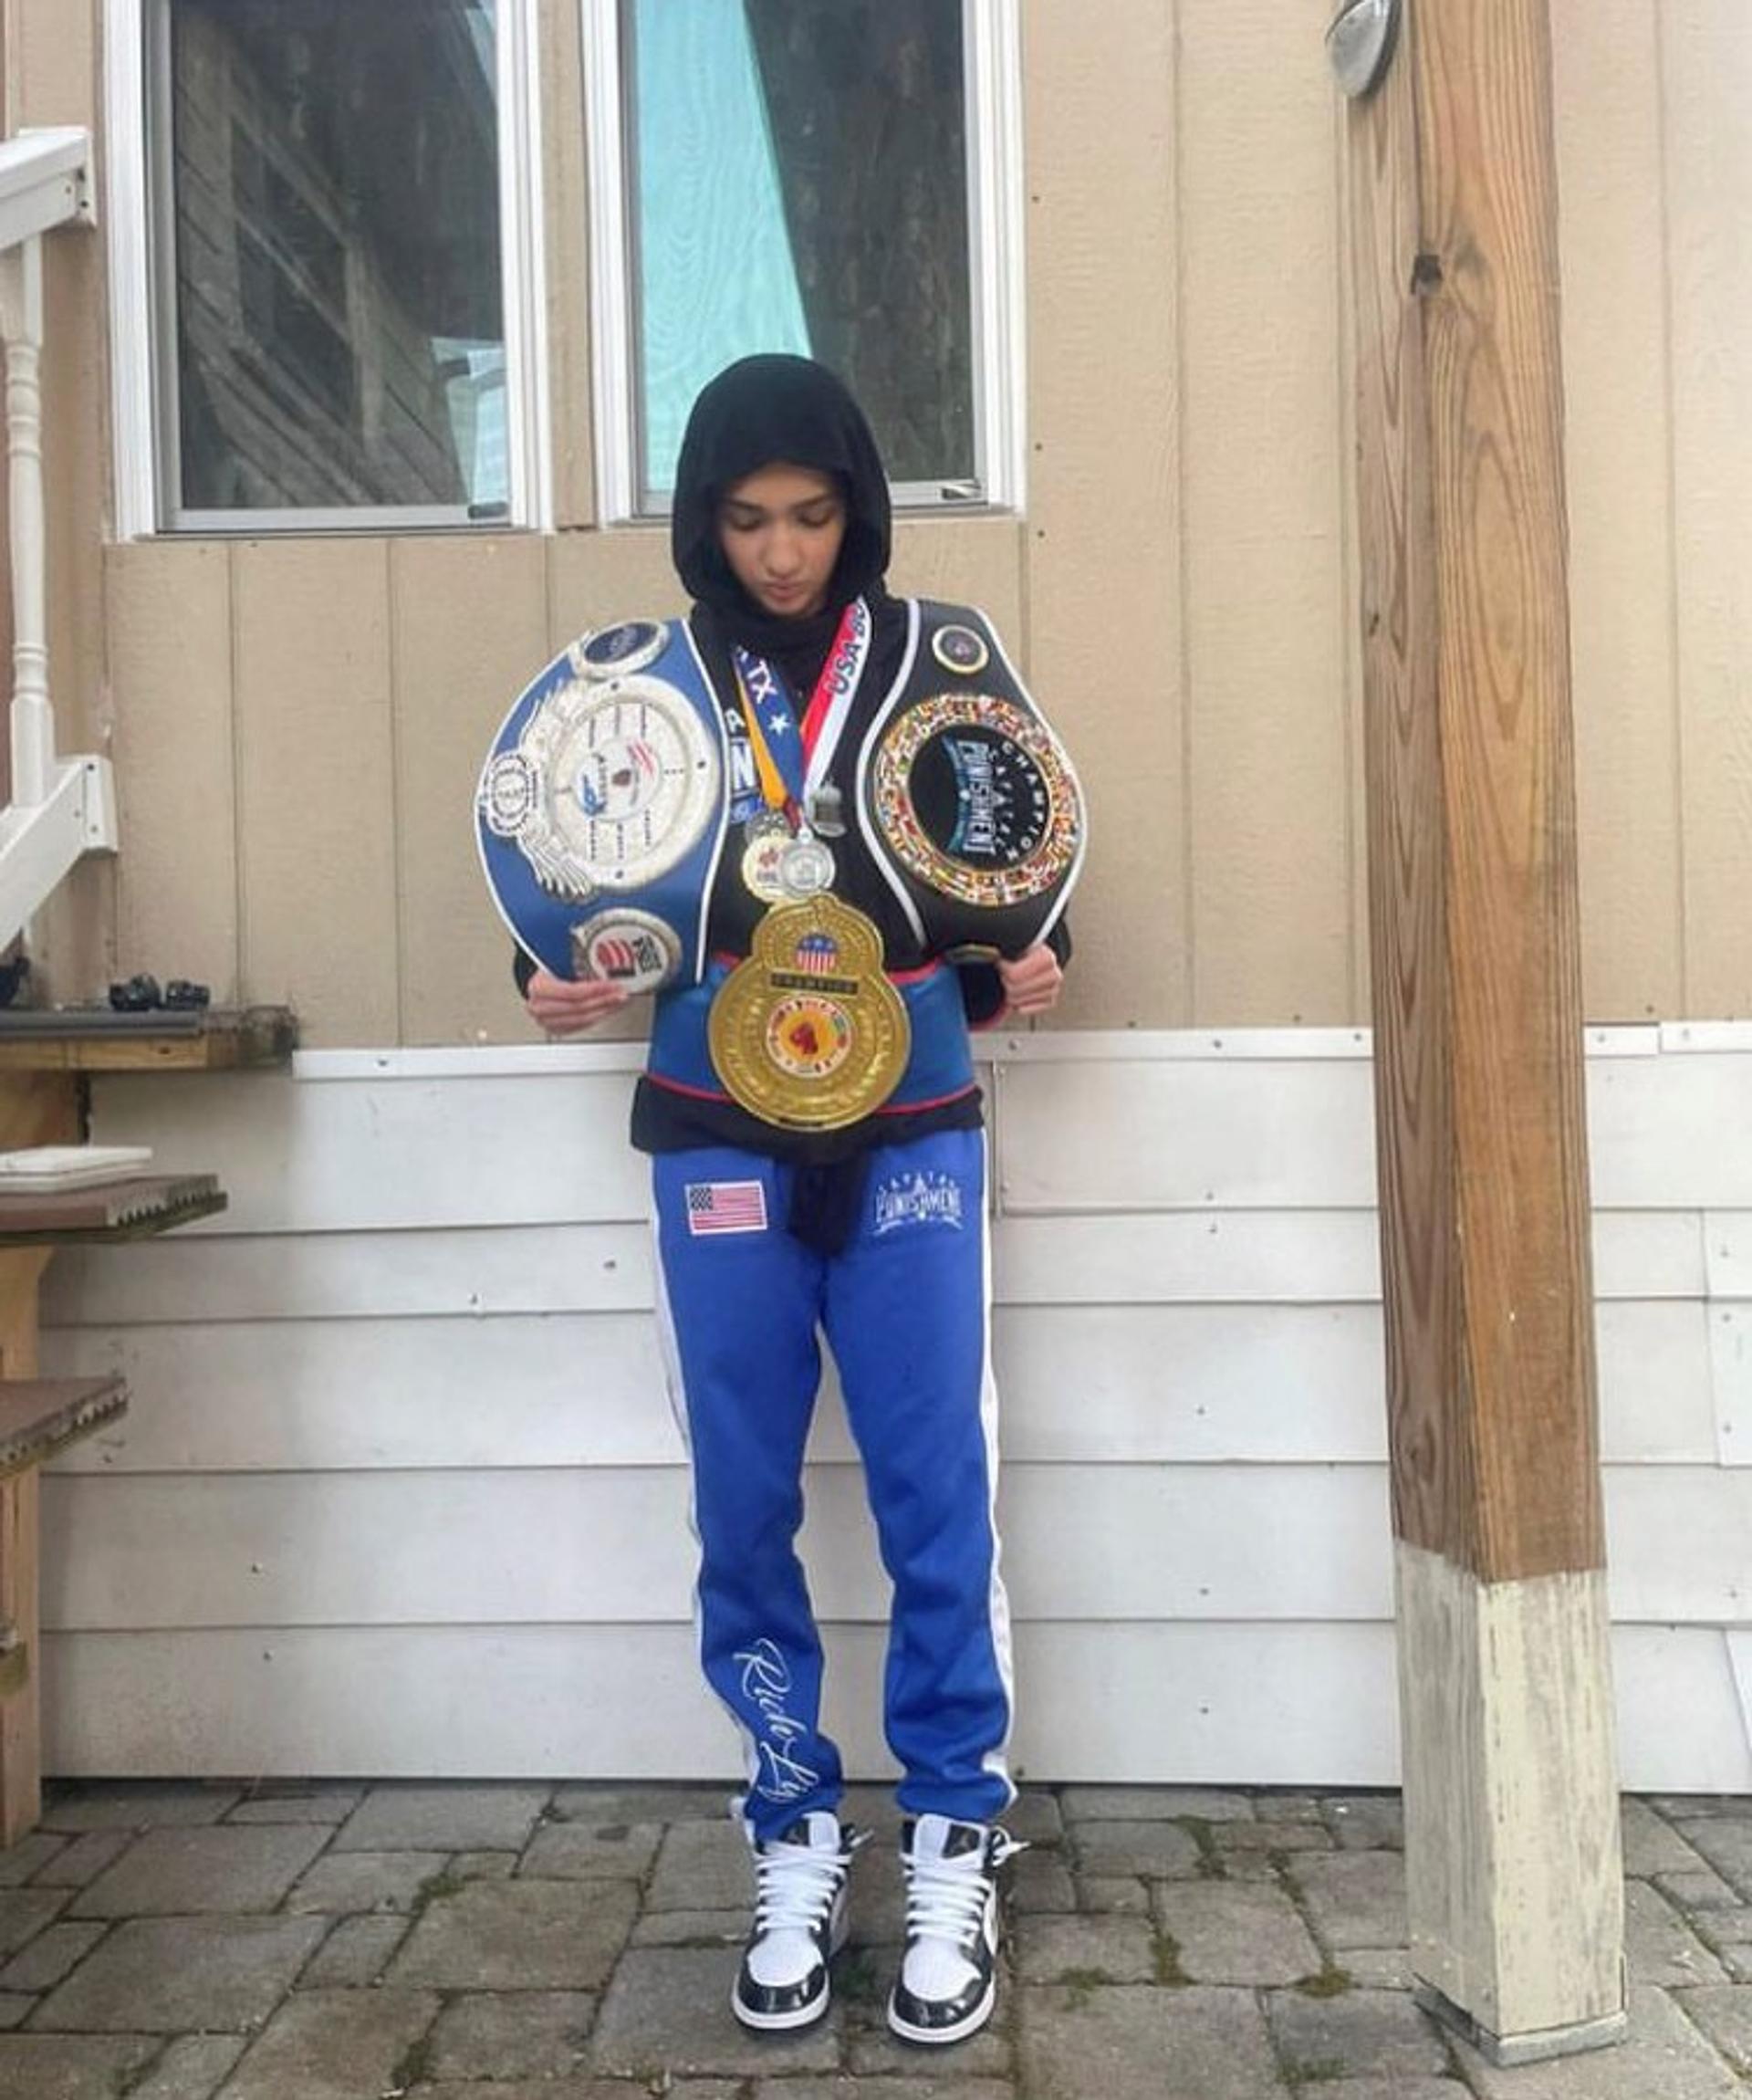 Aya poses with championship belts and medals. 